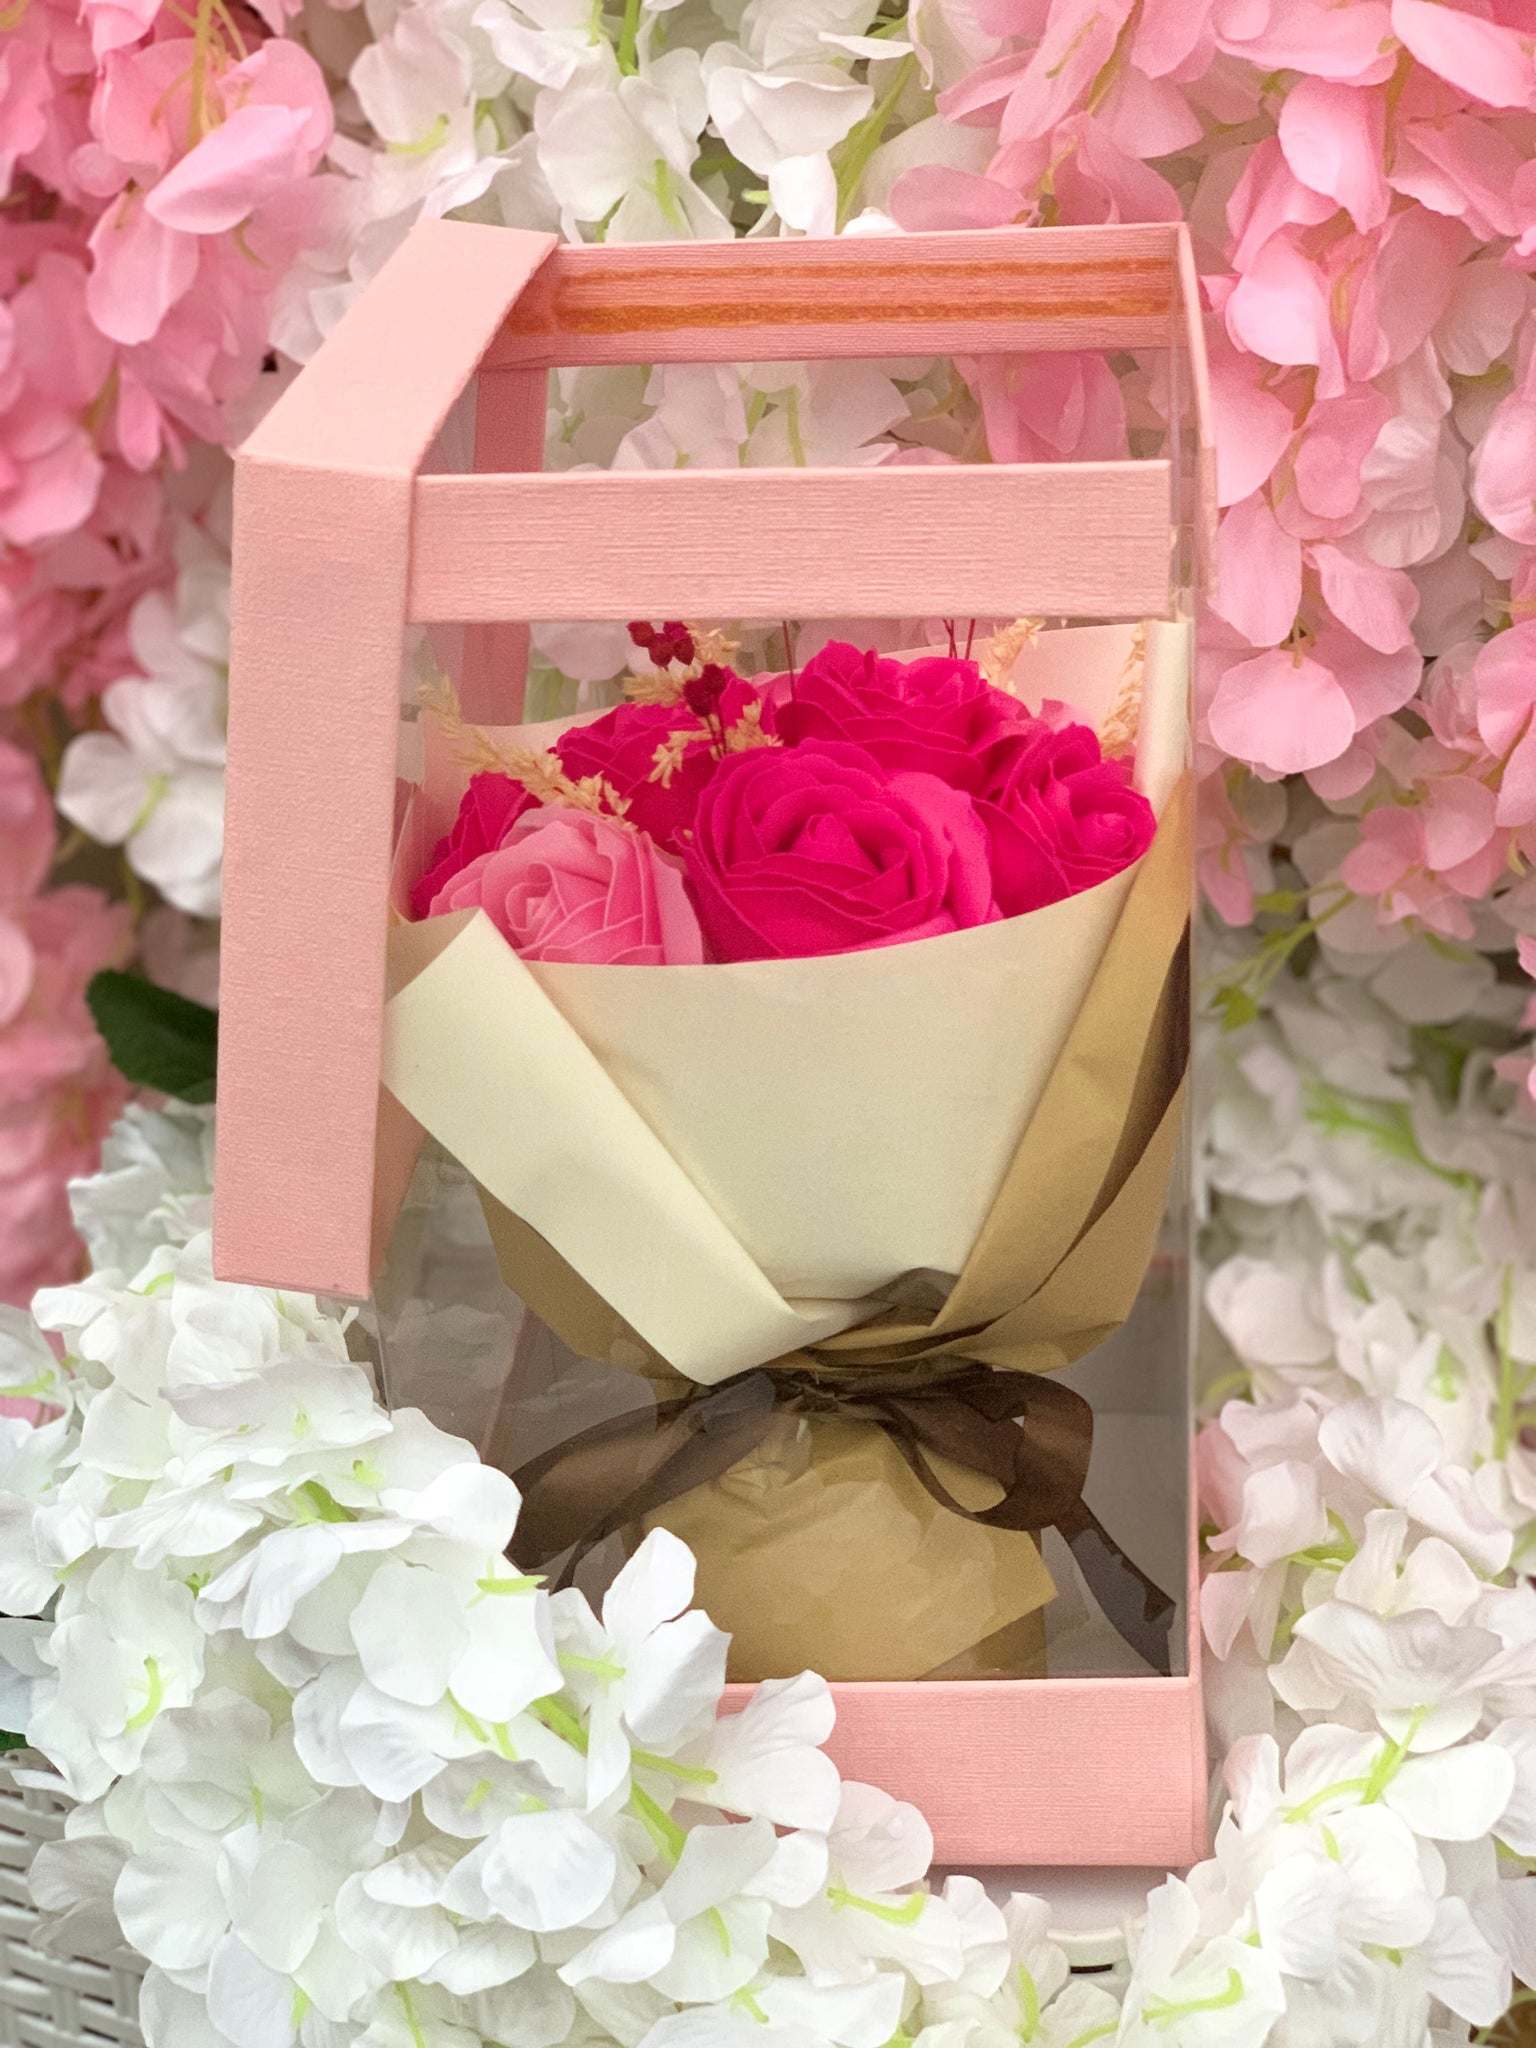 Rose Bouquet In A Box (Pink)